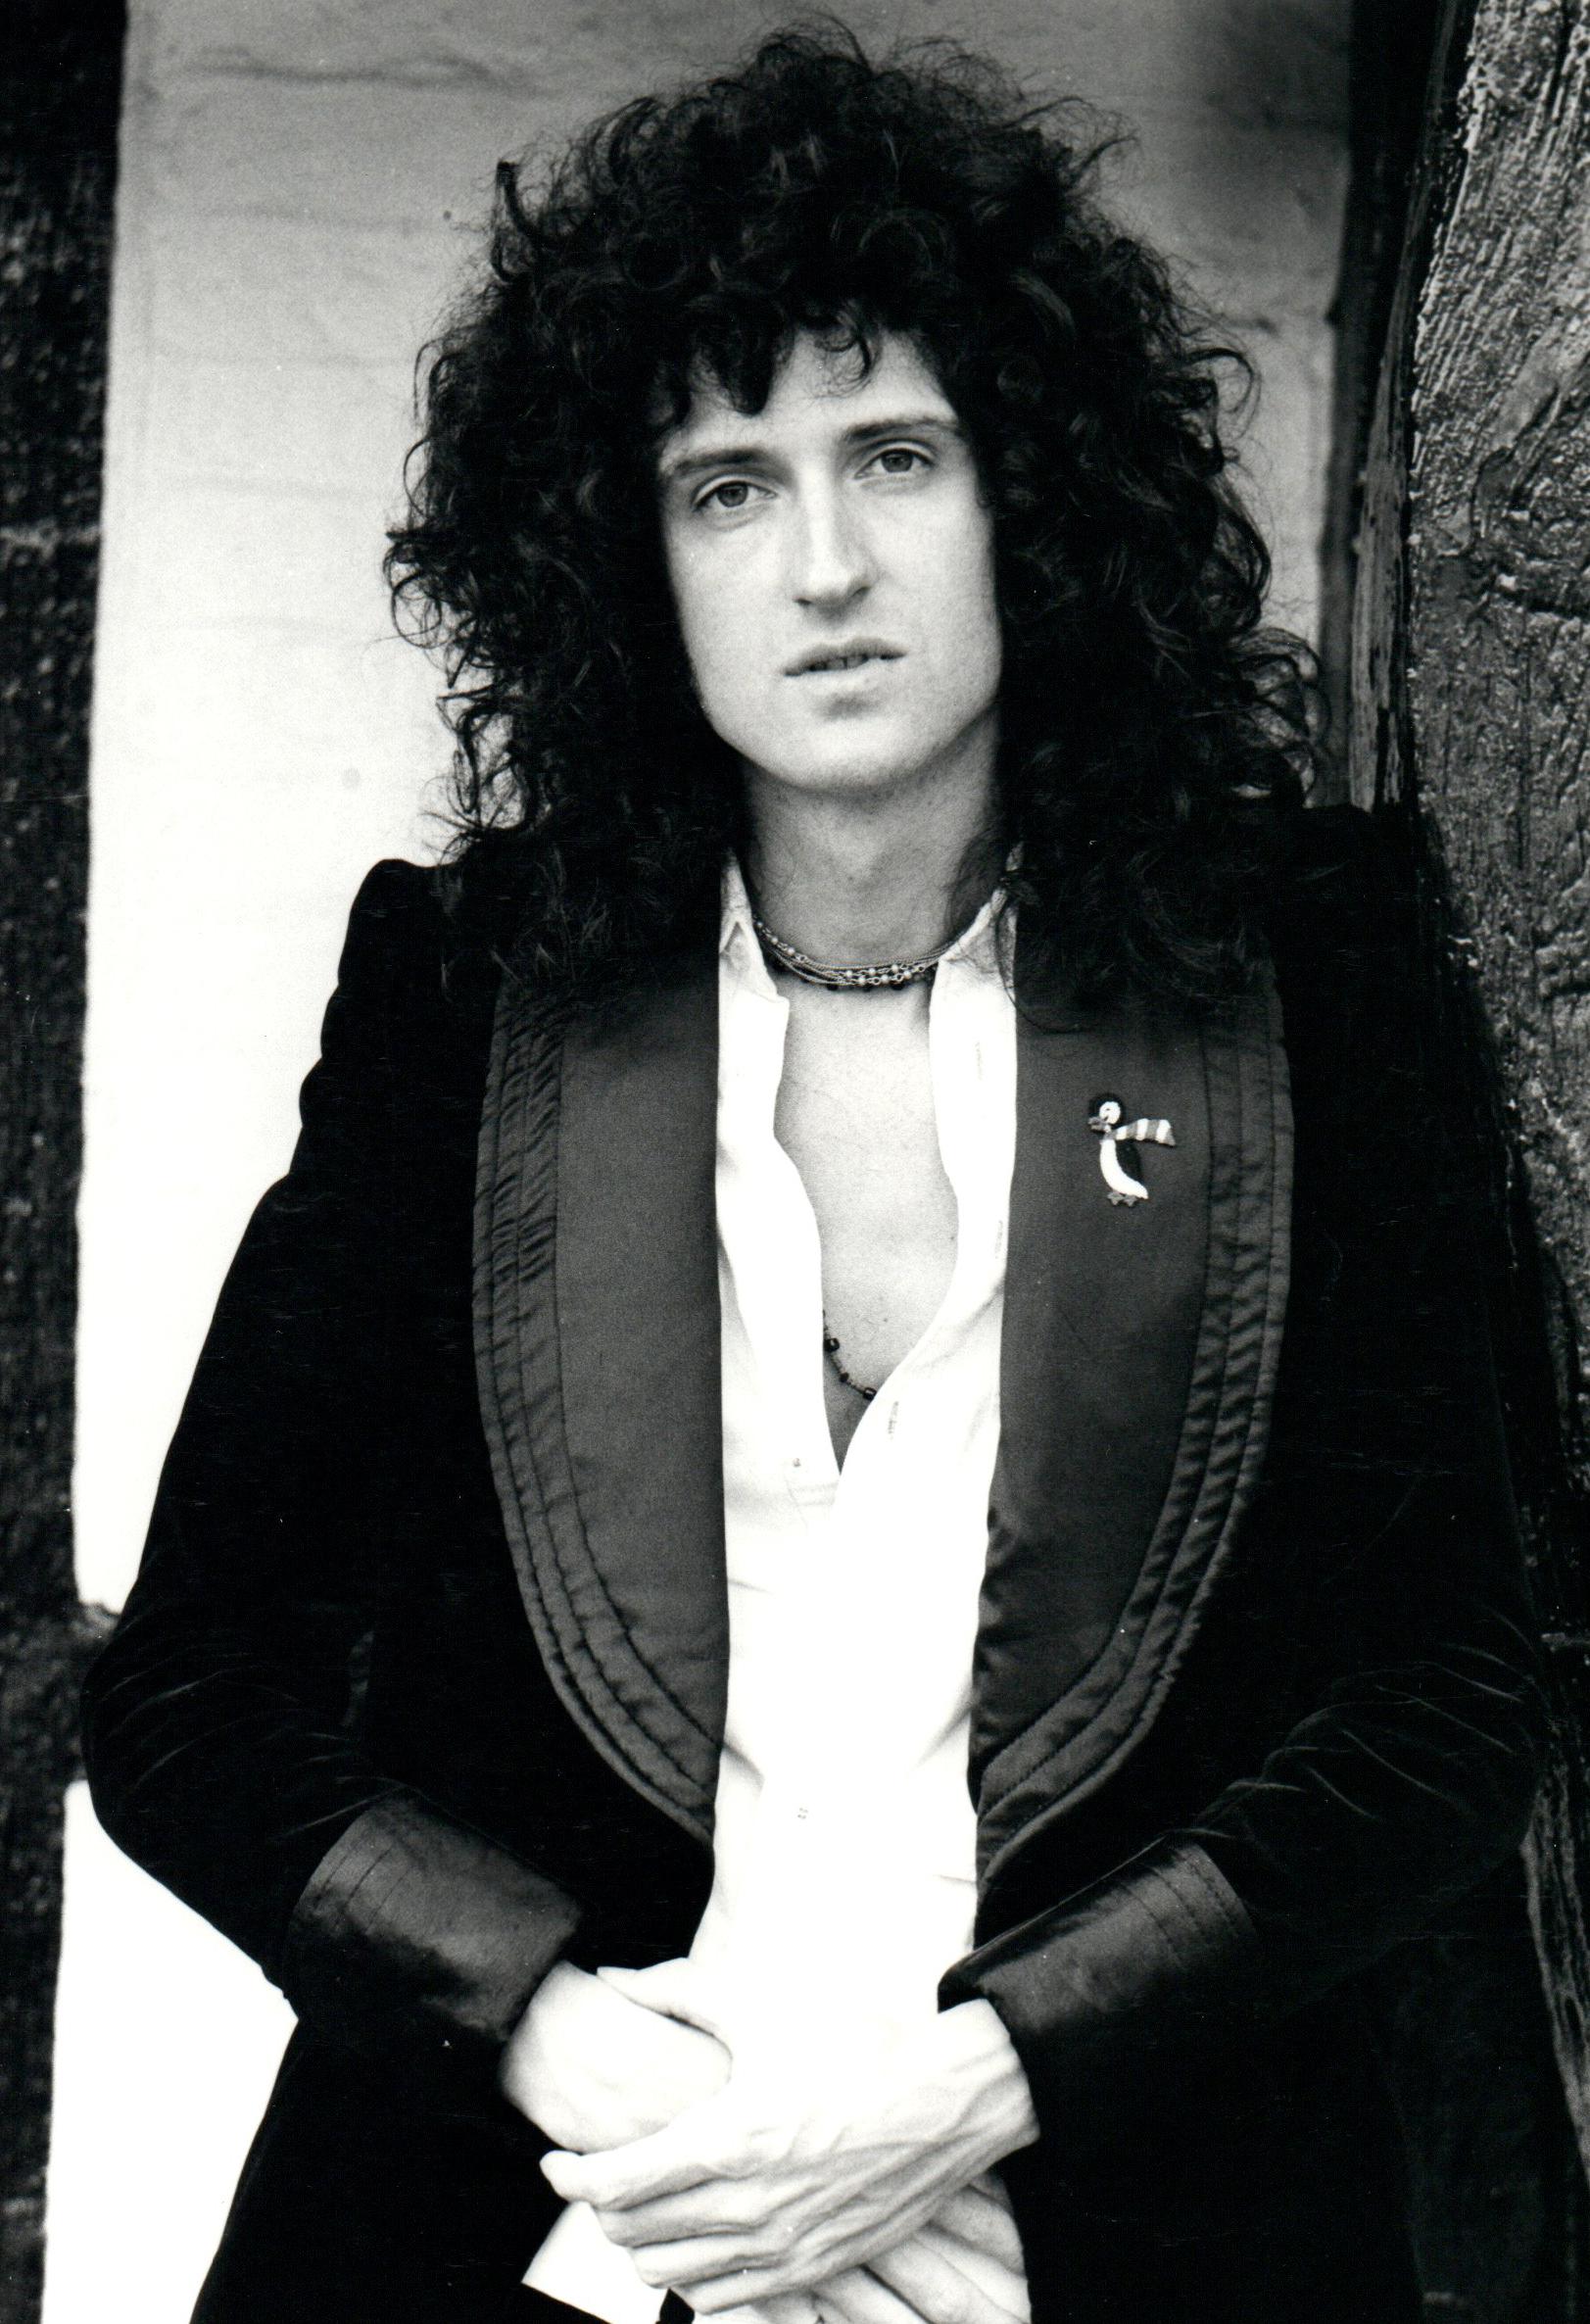 Chris Walter Black and White Photograph - Brian May of Queen Candid Vintage Original Photograph